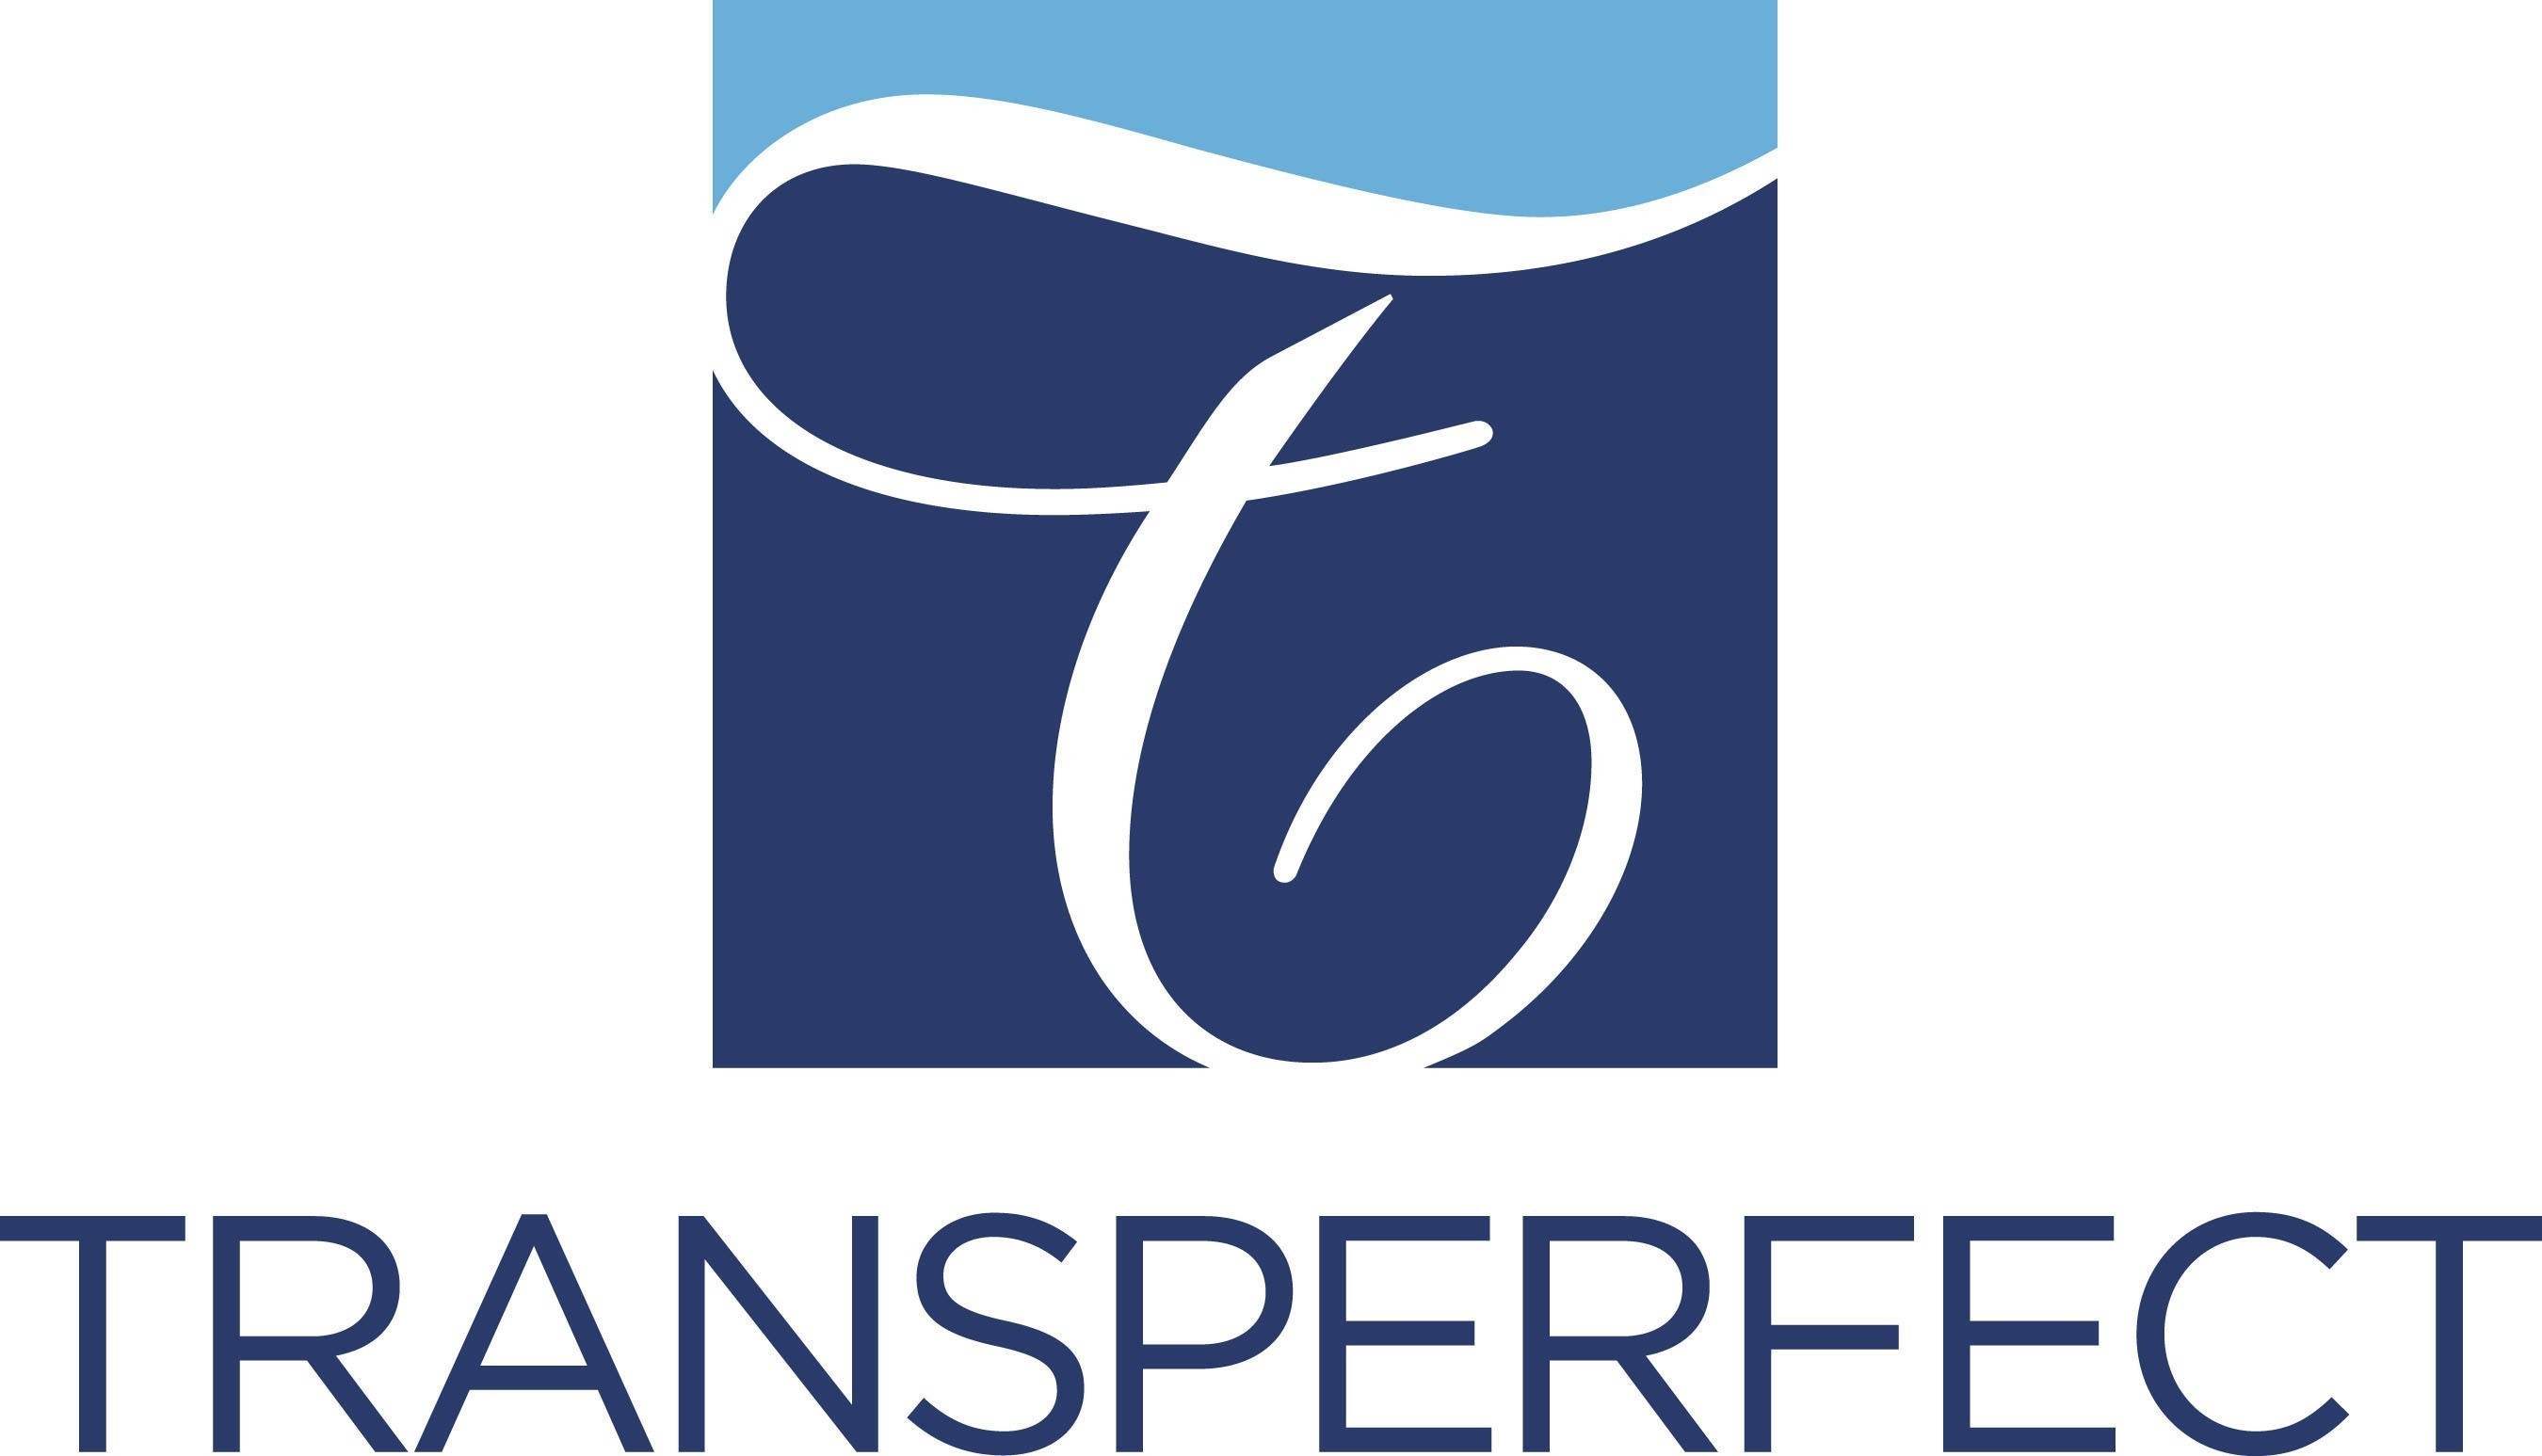 TransPerfect is the world's largest privately held provider of language and technology solutions.